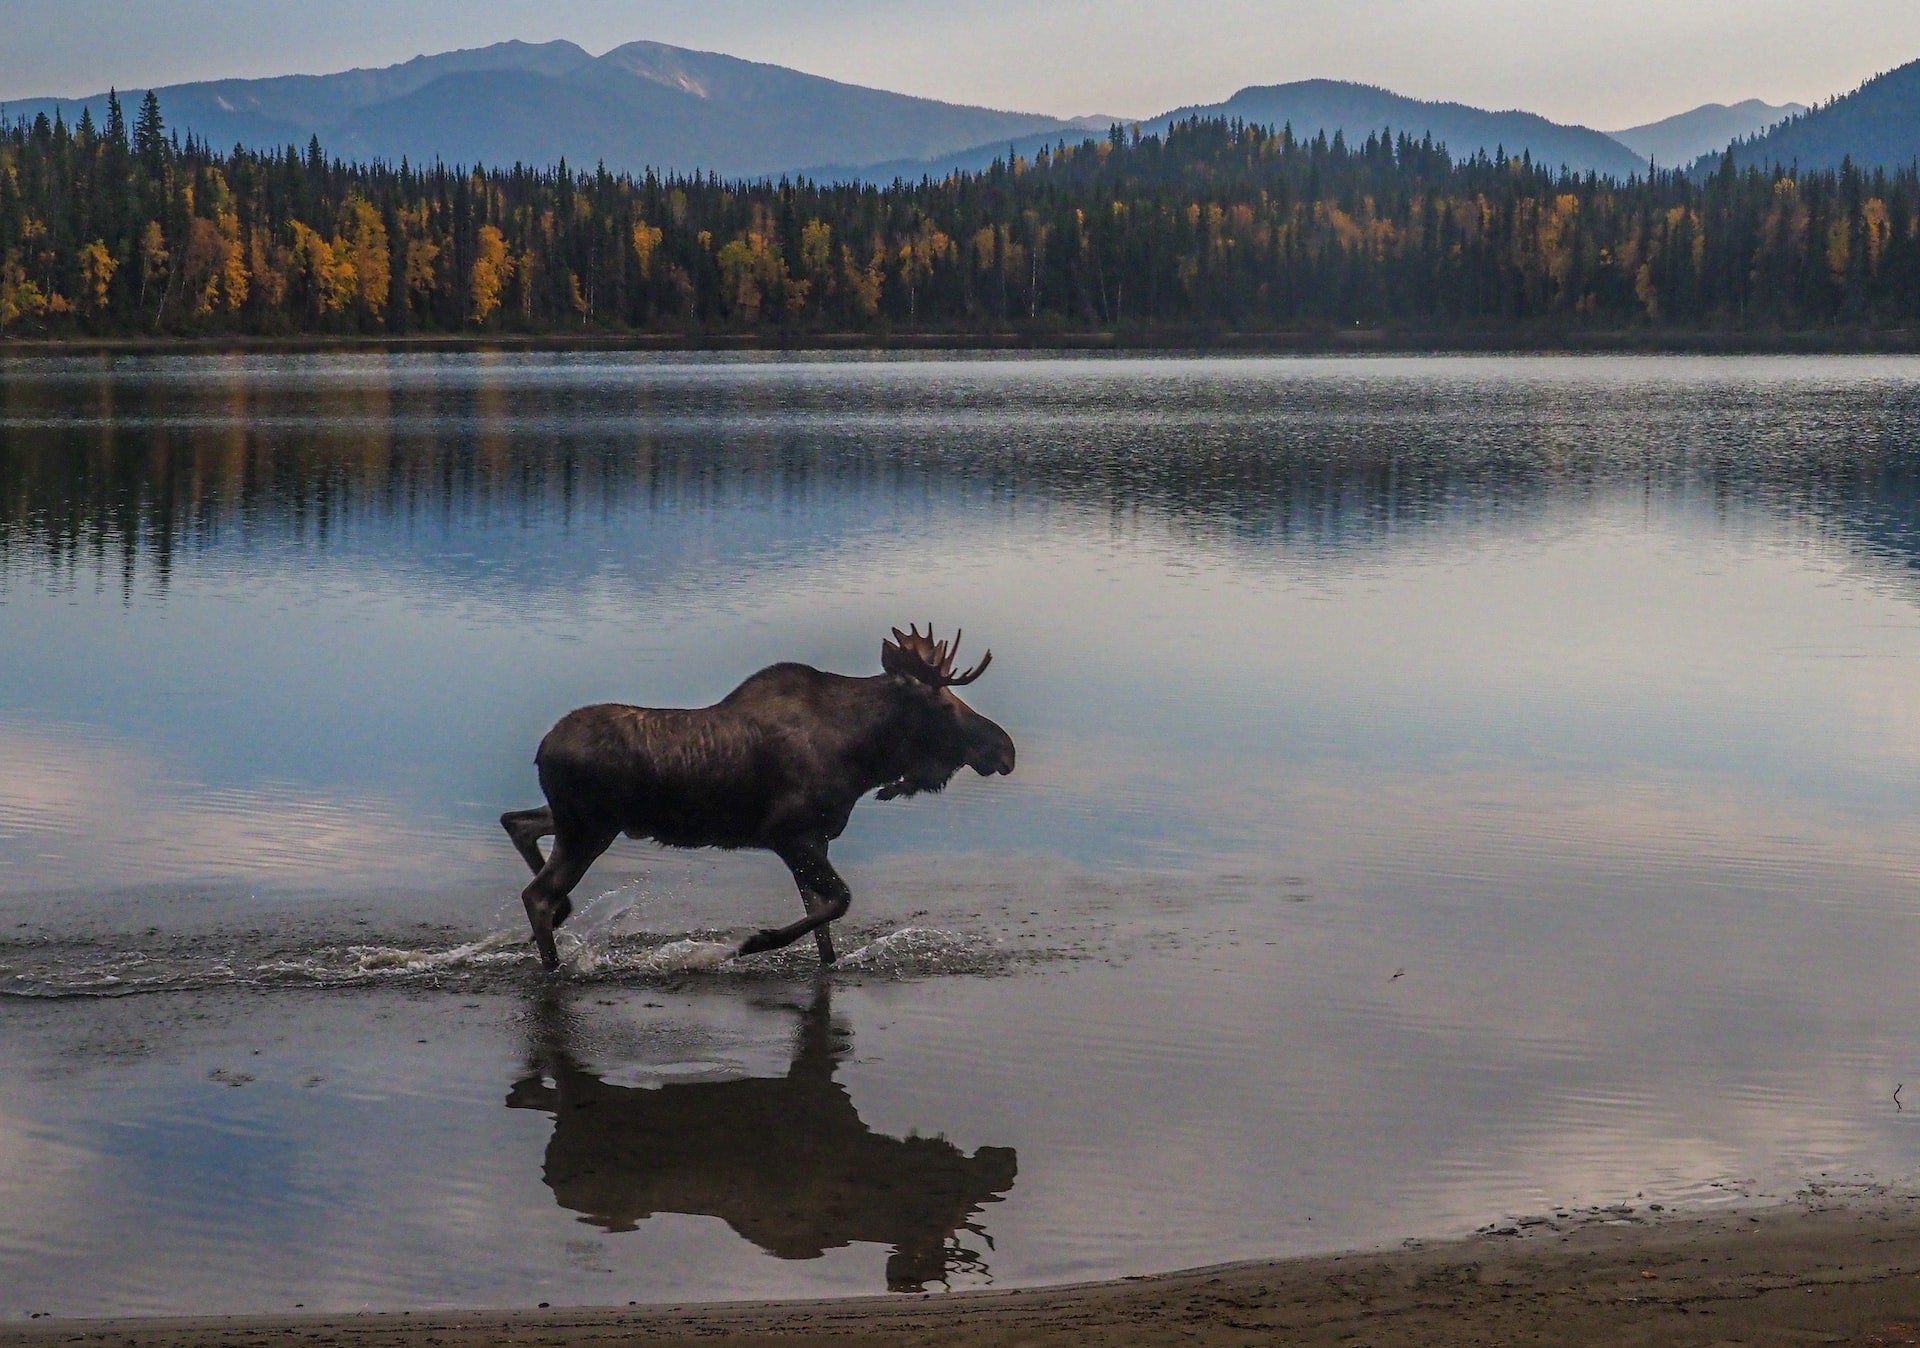 A great photo of a moose in water by Lesly Derksen on Unsplash